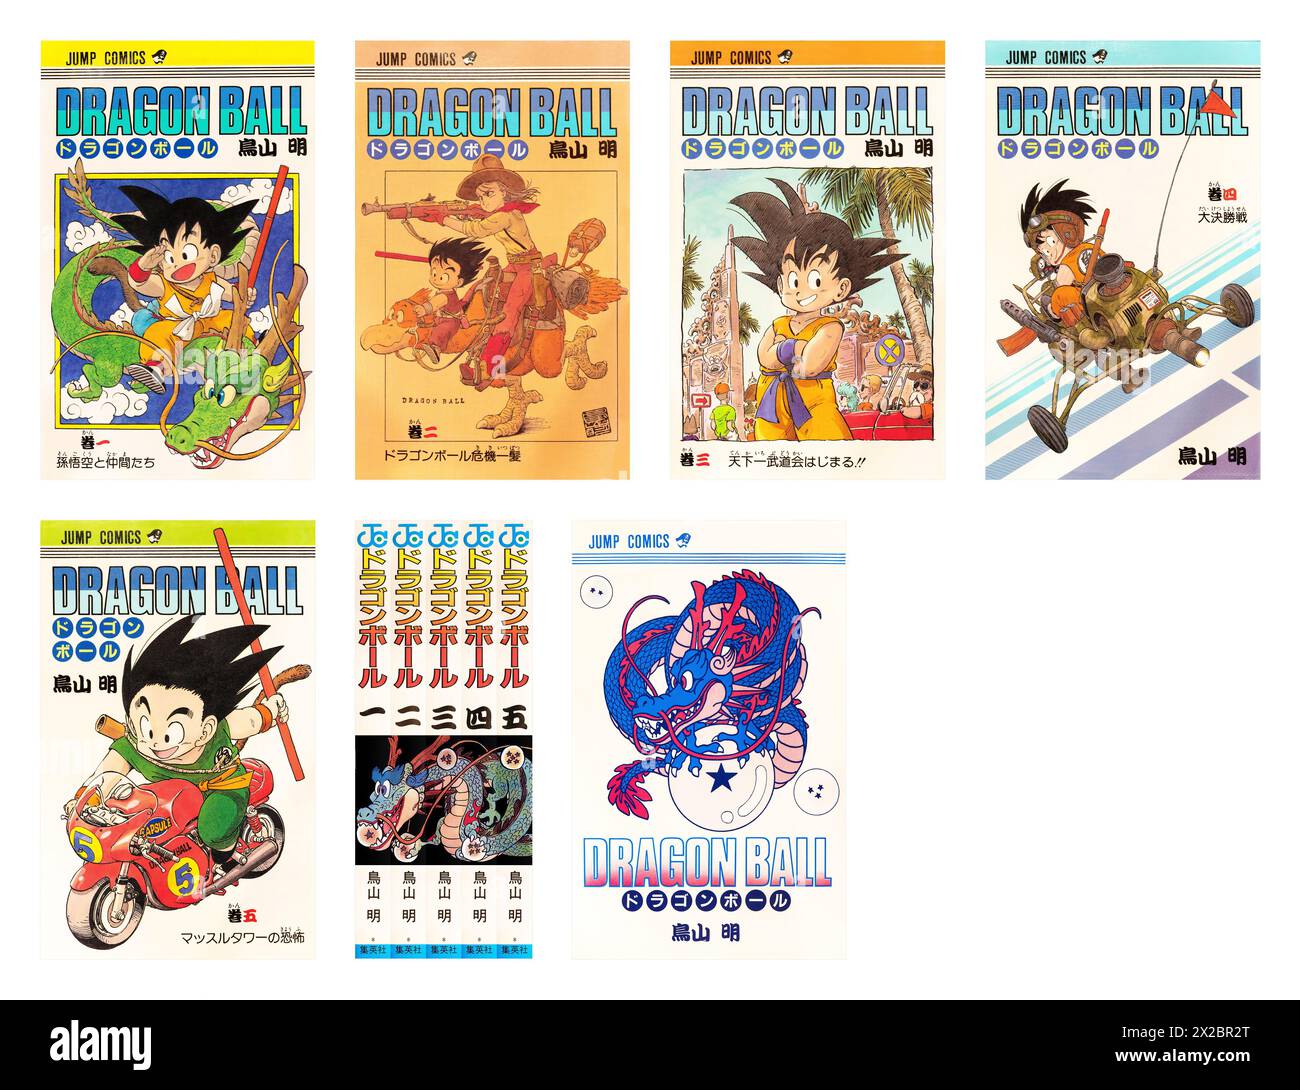 tokyo, japan - sep 10 1985: (set 1/7) First design covers of volumes 01 to 05 of Japanese manga Dragon Ball covering the Son Goku saga illustrated by Stock Photo